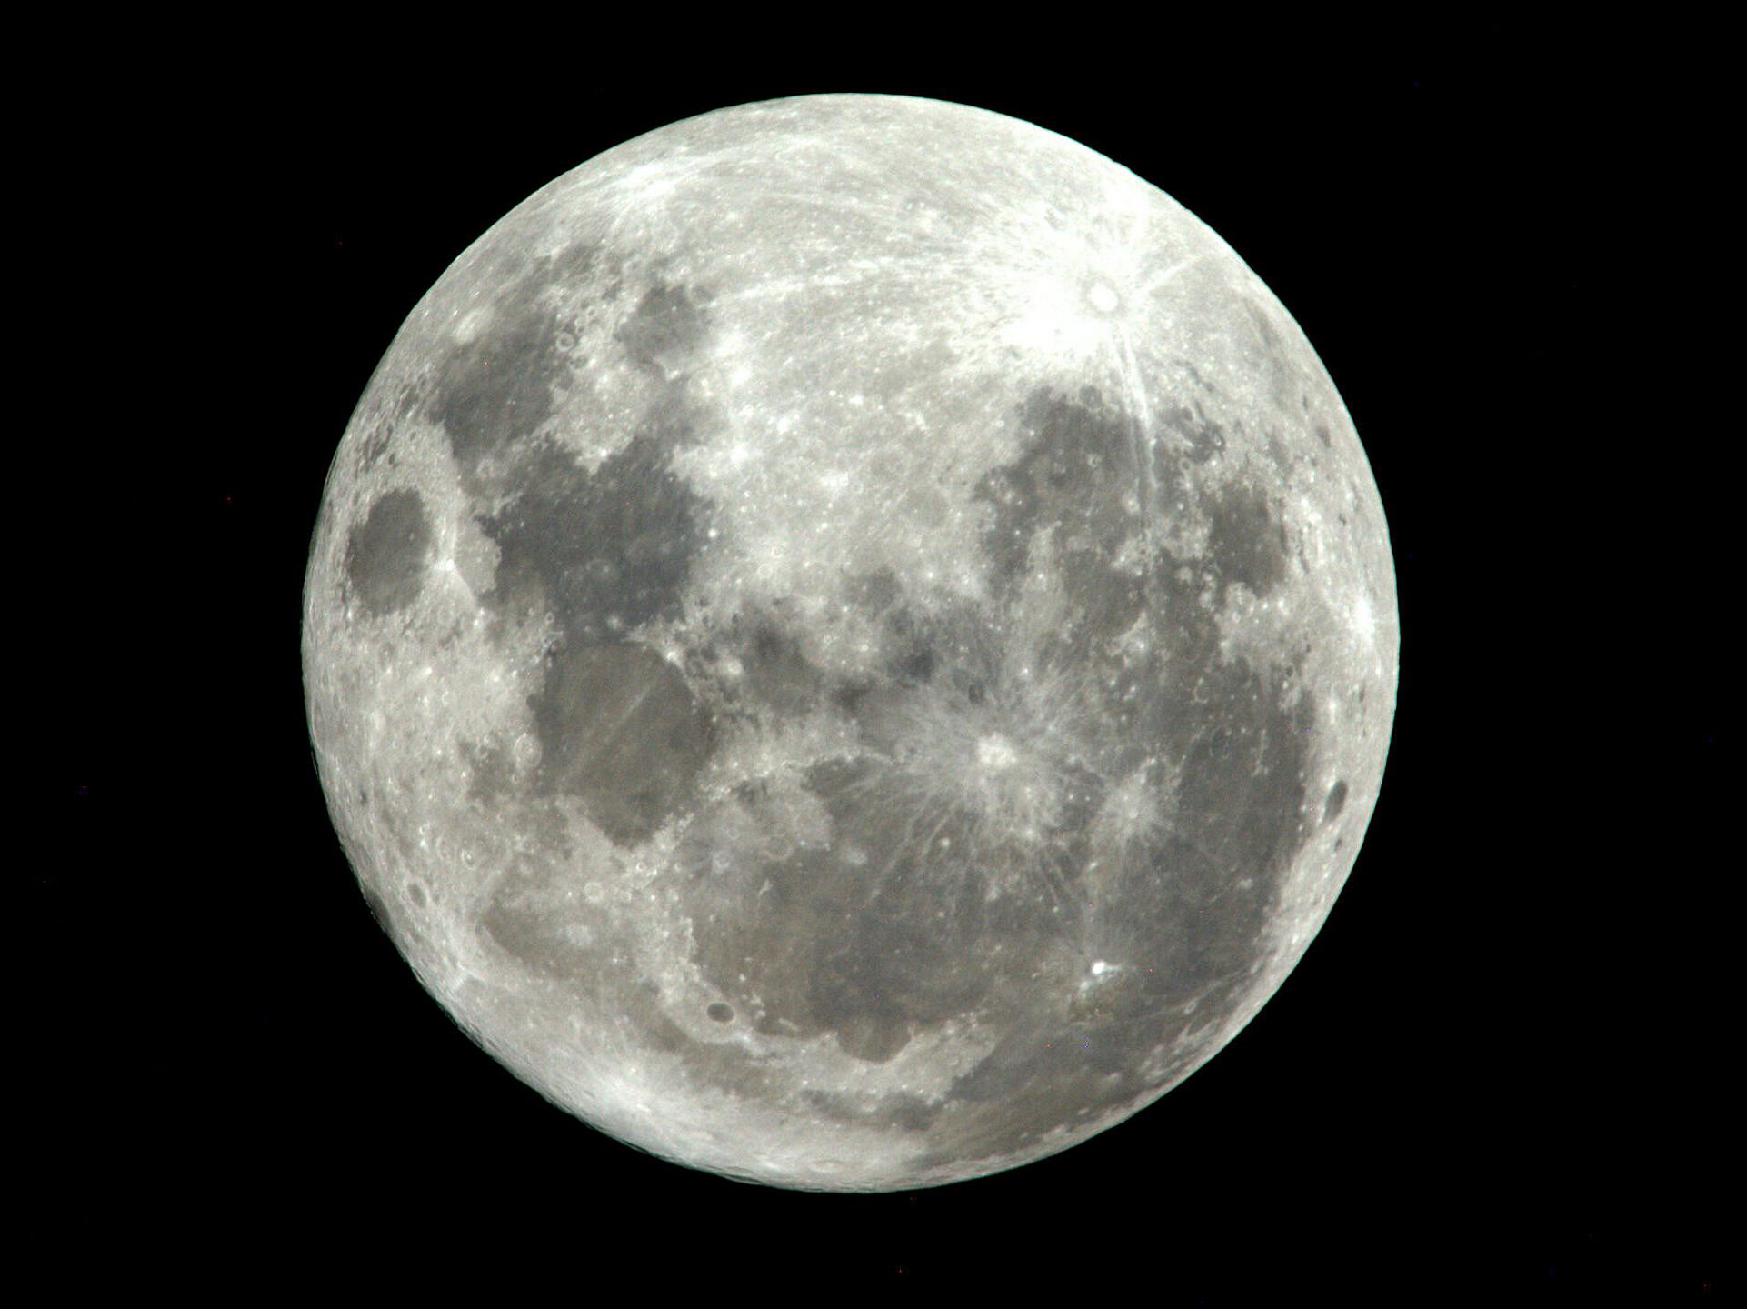 Figure 6: The Moon seen from the International Space Station. The image was taken by ESA astronaut Paolo Nespoli during his second mission to 'MagISStra' on 20 March 2011. Paolo commented on the image: "Supermoon was spectacular from here!" (image credit: ESA/NASA)